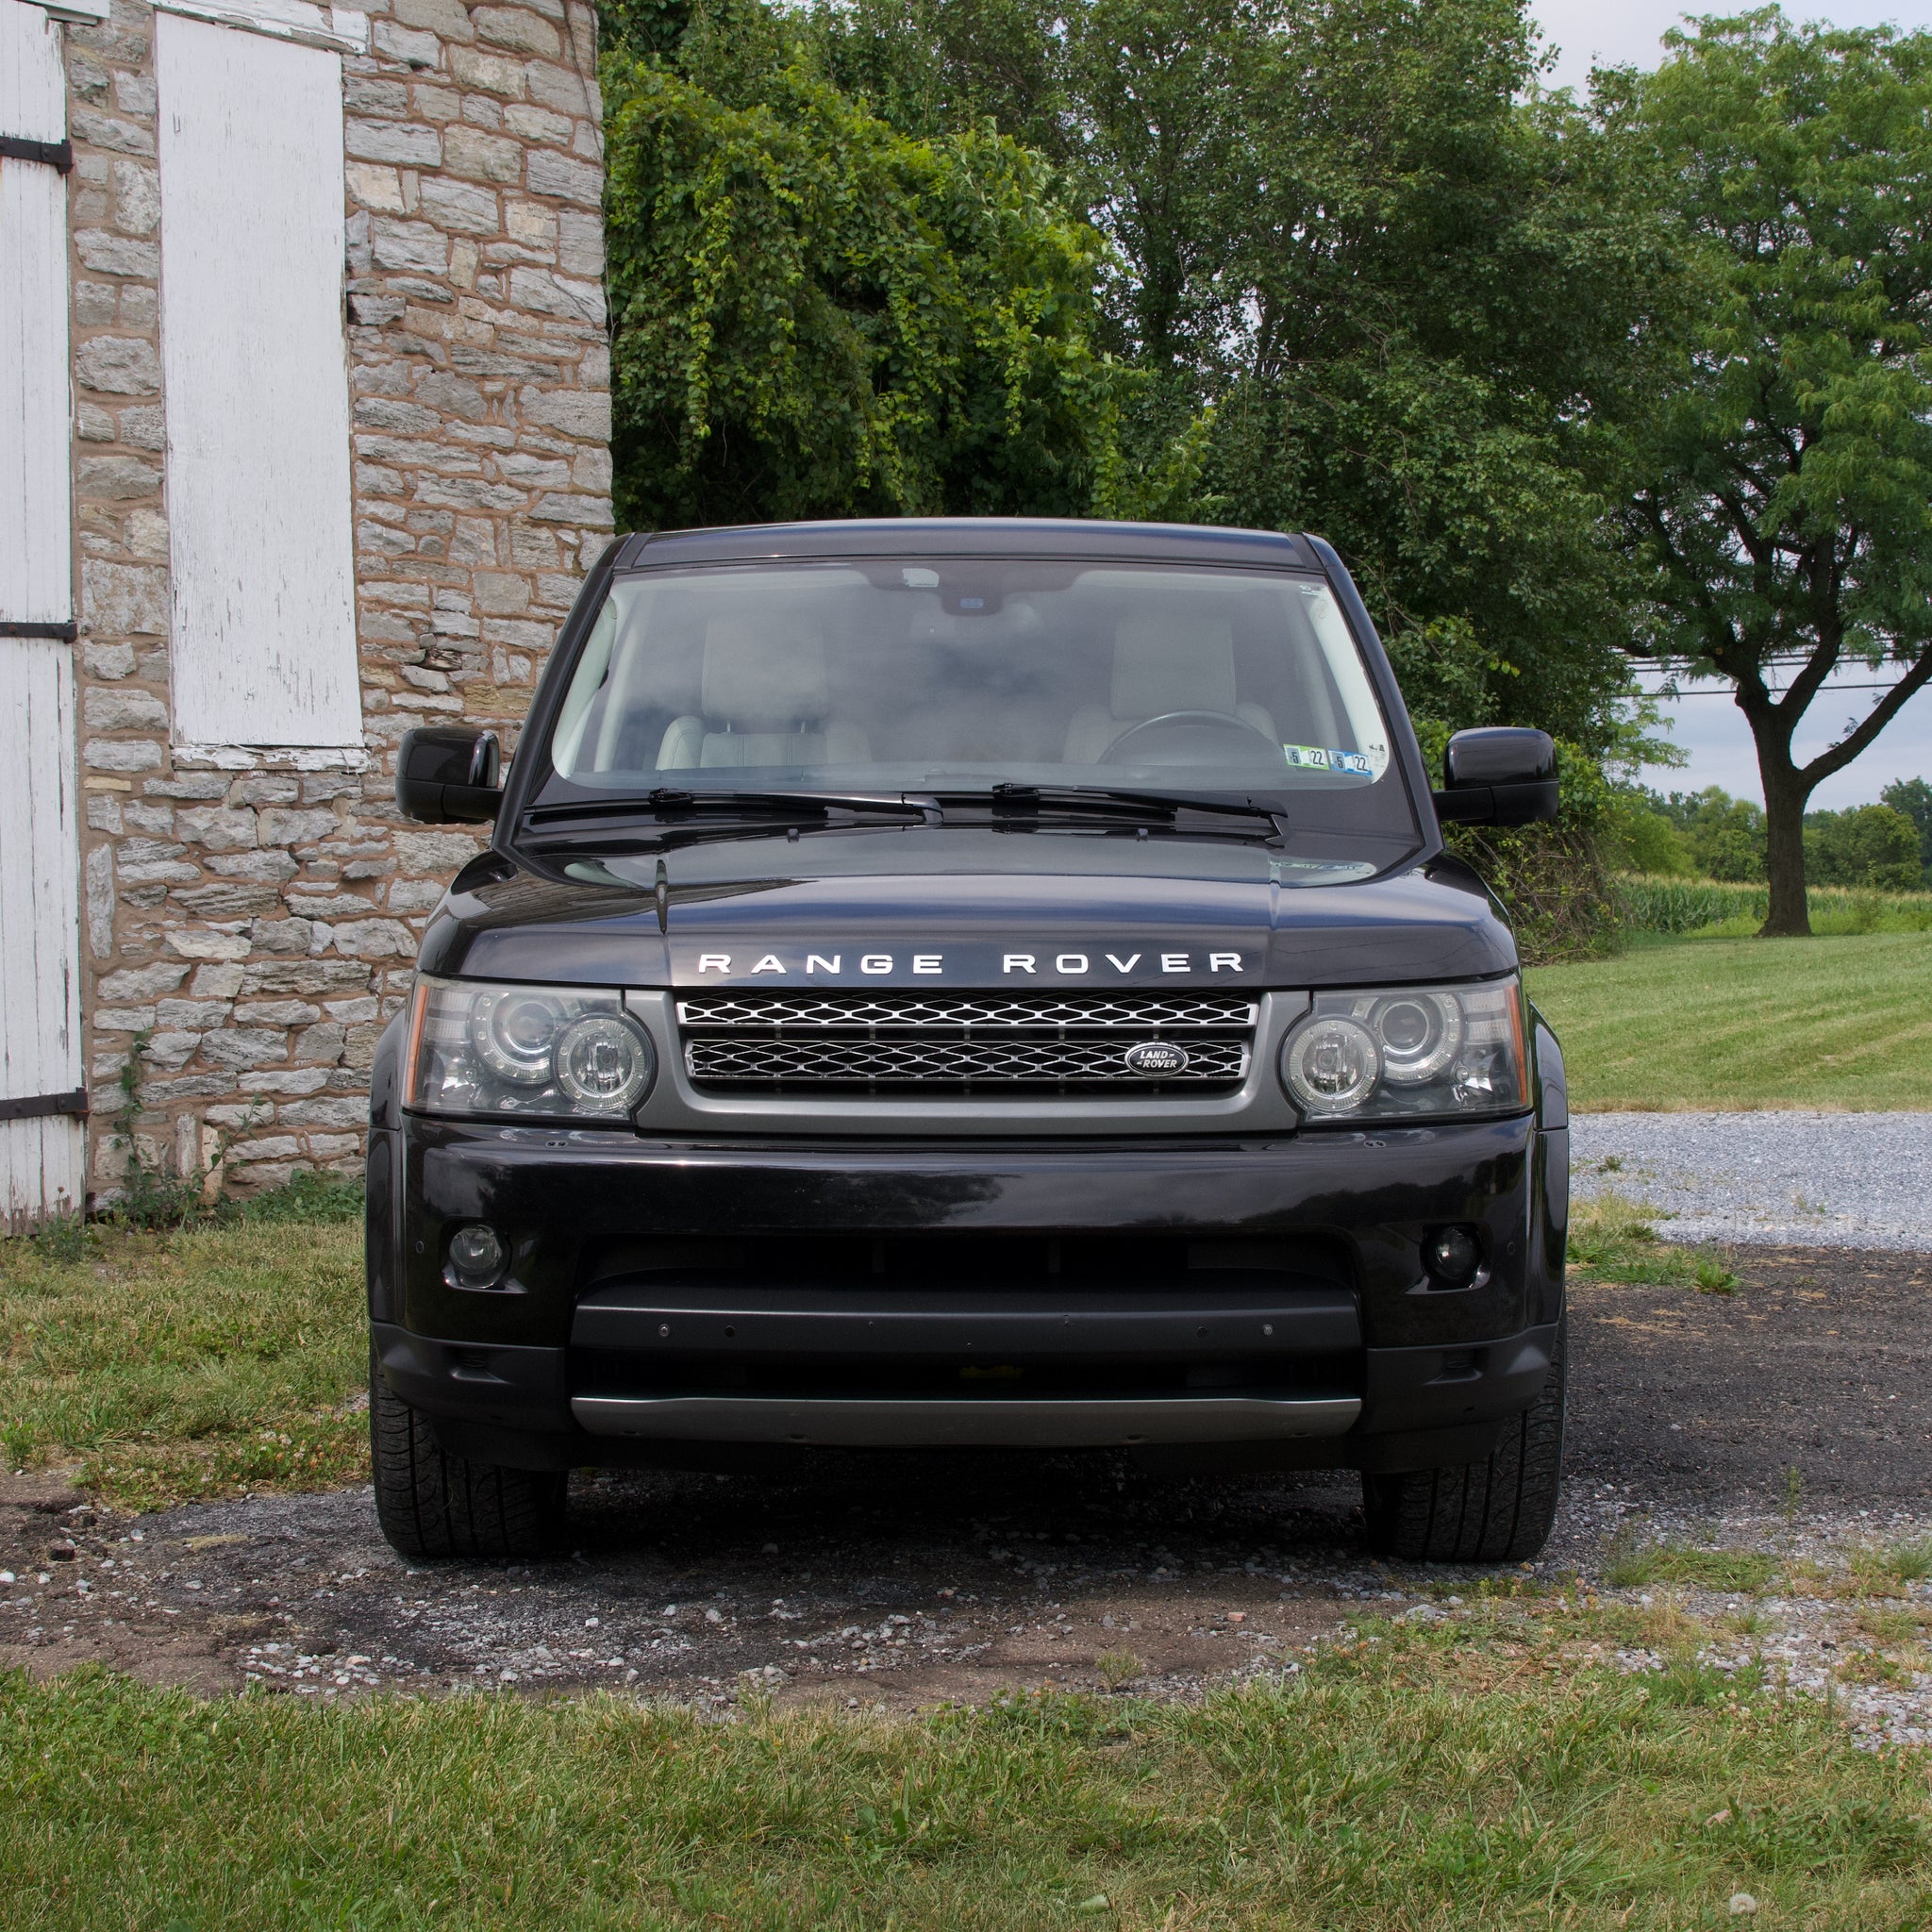 SOLD 2011 Range Rover Sport 5.0L Supercharged in Black with Ivory Interior